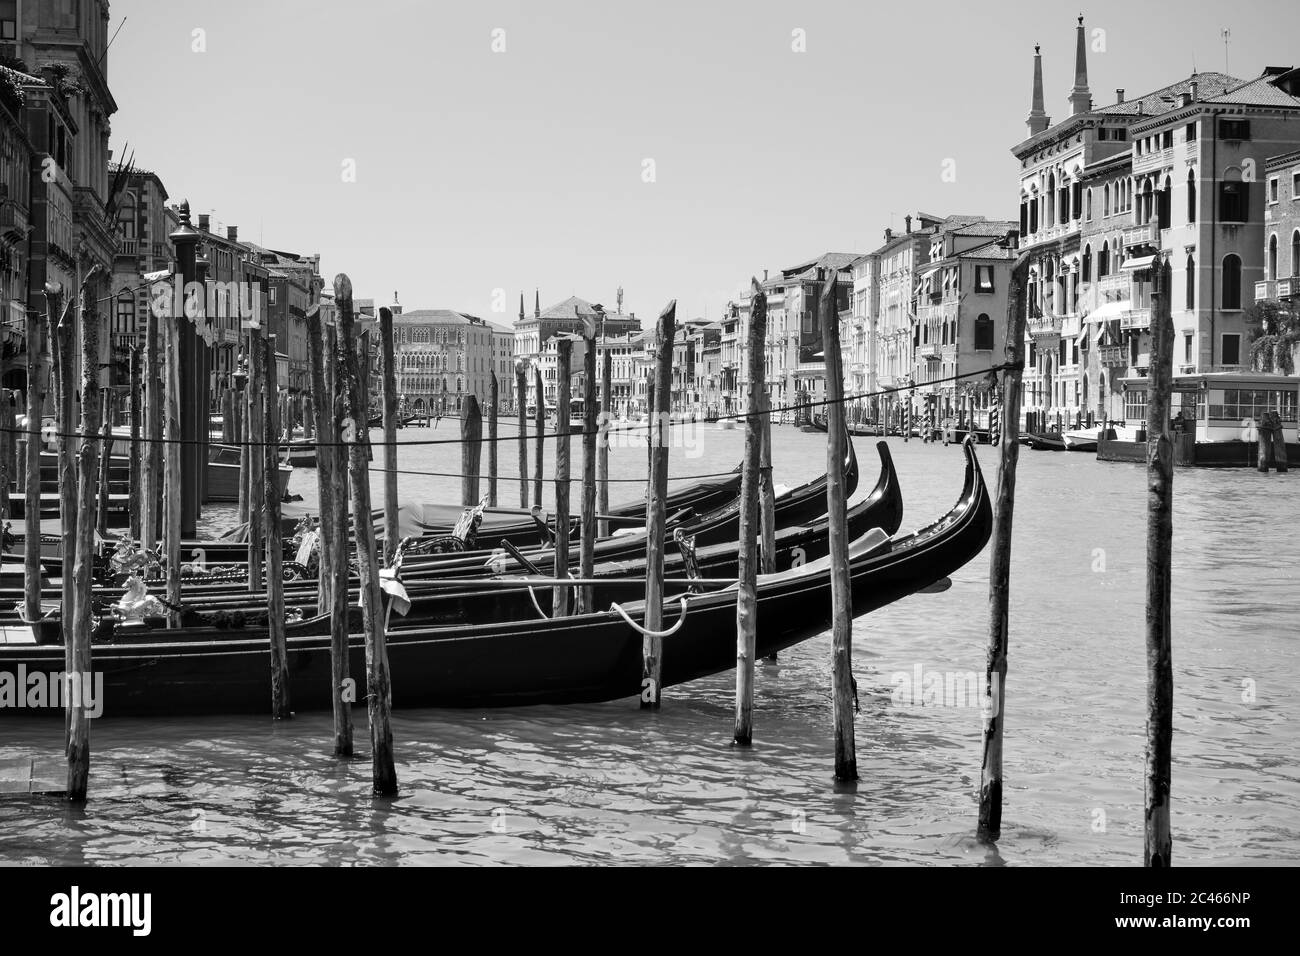 Gondolas on the Grand Canal in Venice, Italy. Black and white venetian view Stock Photo